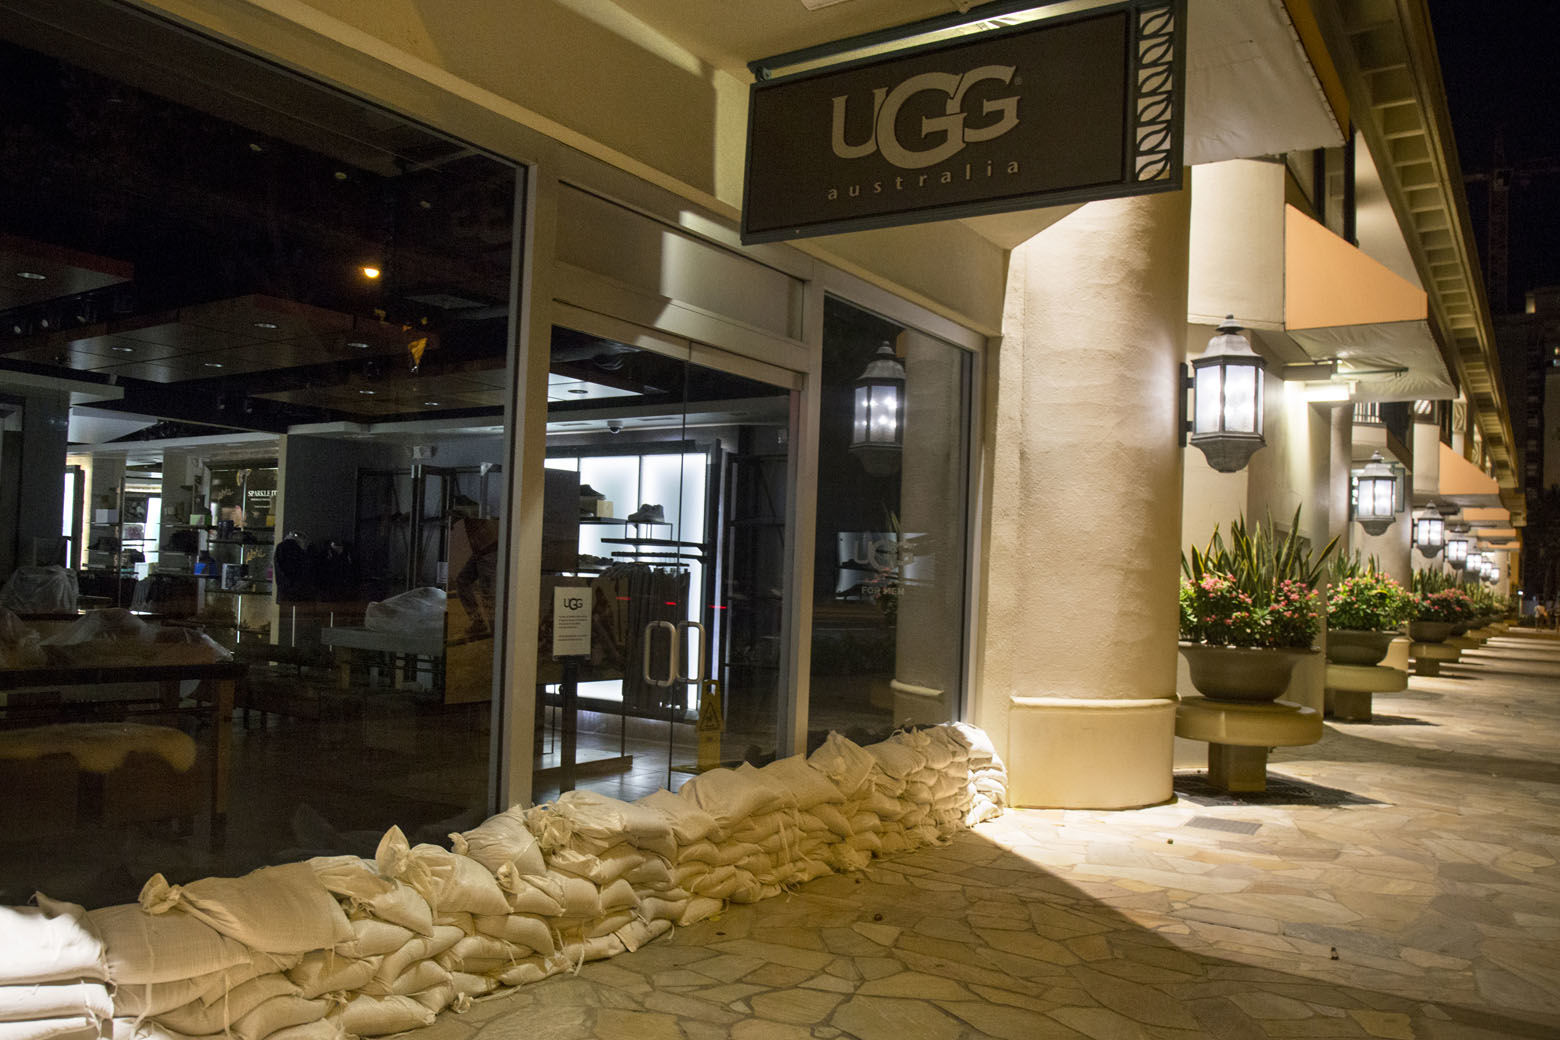 HONOLULU, HI - AUGUST 23: 2018   Ugg had the largest amount of sand bags to protect their Kalakaua Avenue store from flooding as any of the other stores as Hurricane Lane approaches Waikiki Beach on Thursday, August 23, 2018 in Honolulu, Hi.  
(Photo by Kat Wade/Getty Images)